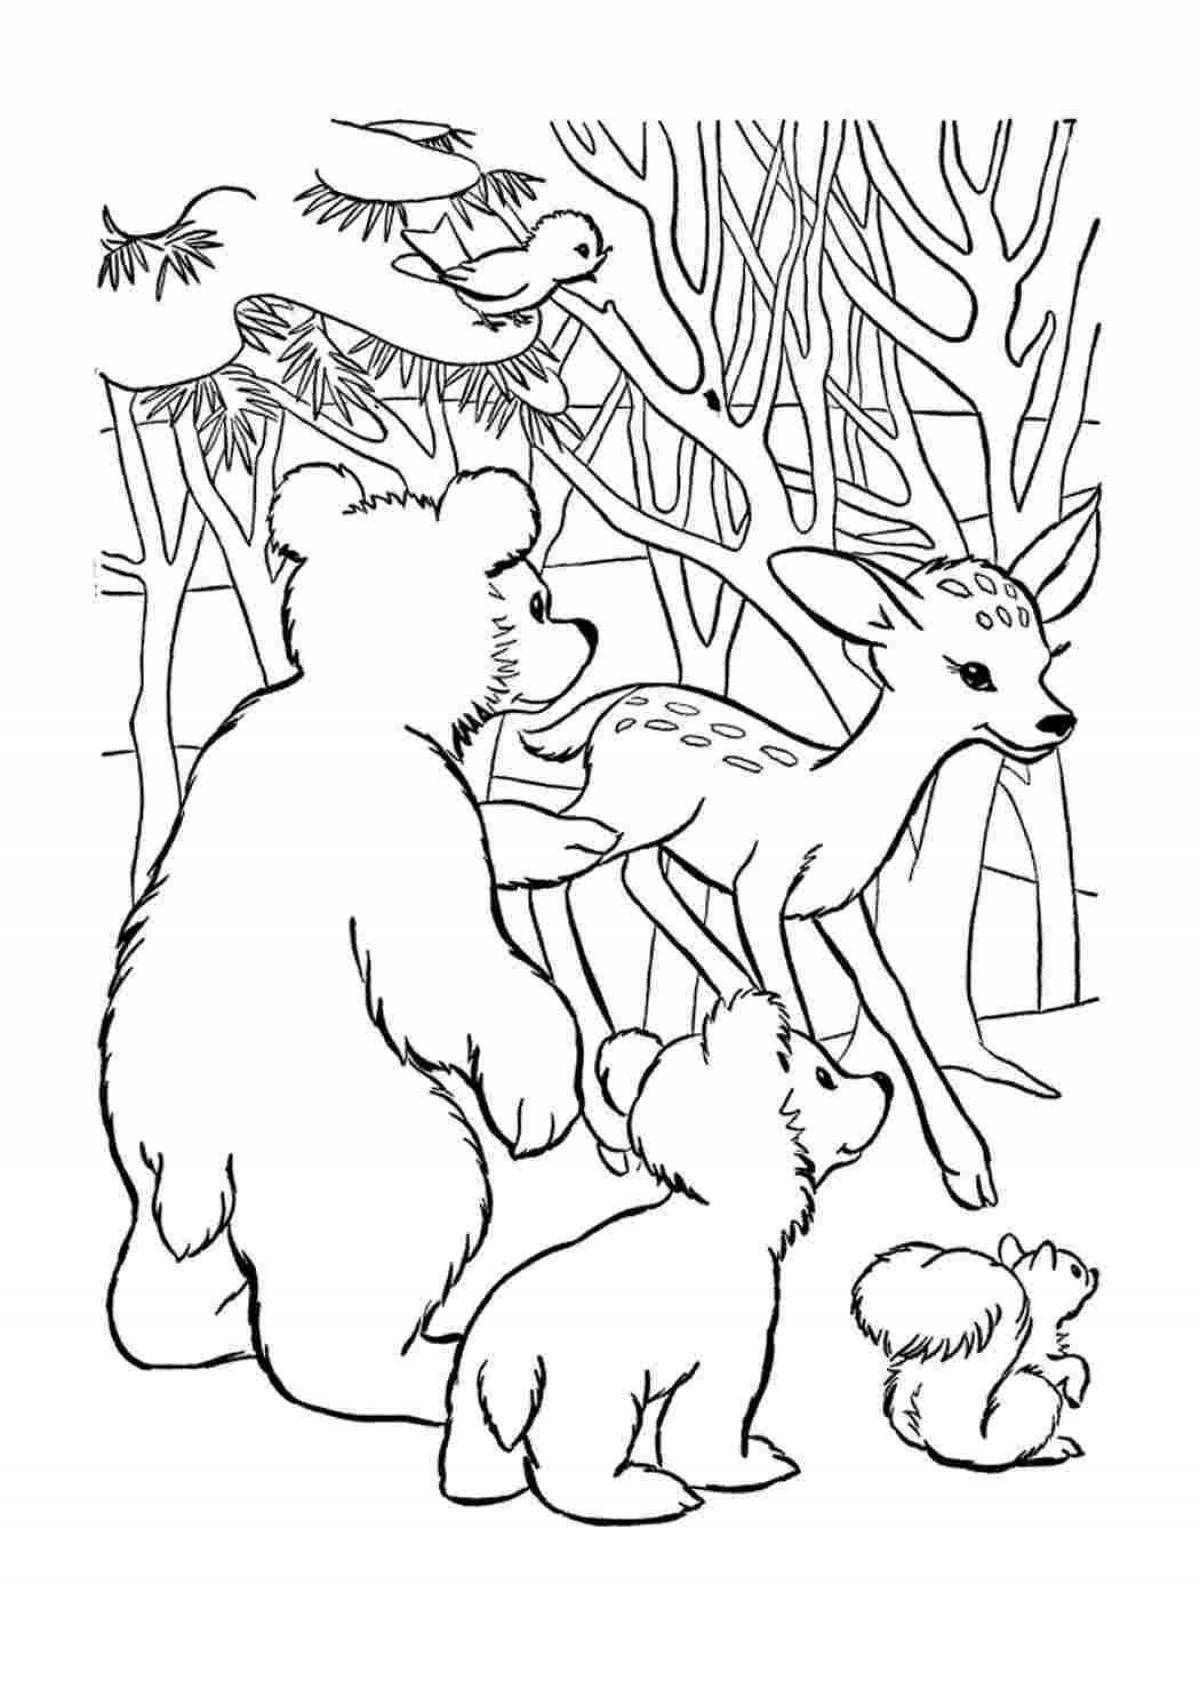 Coloring book shining forest animals for children 6-7 years old